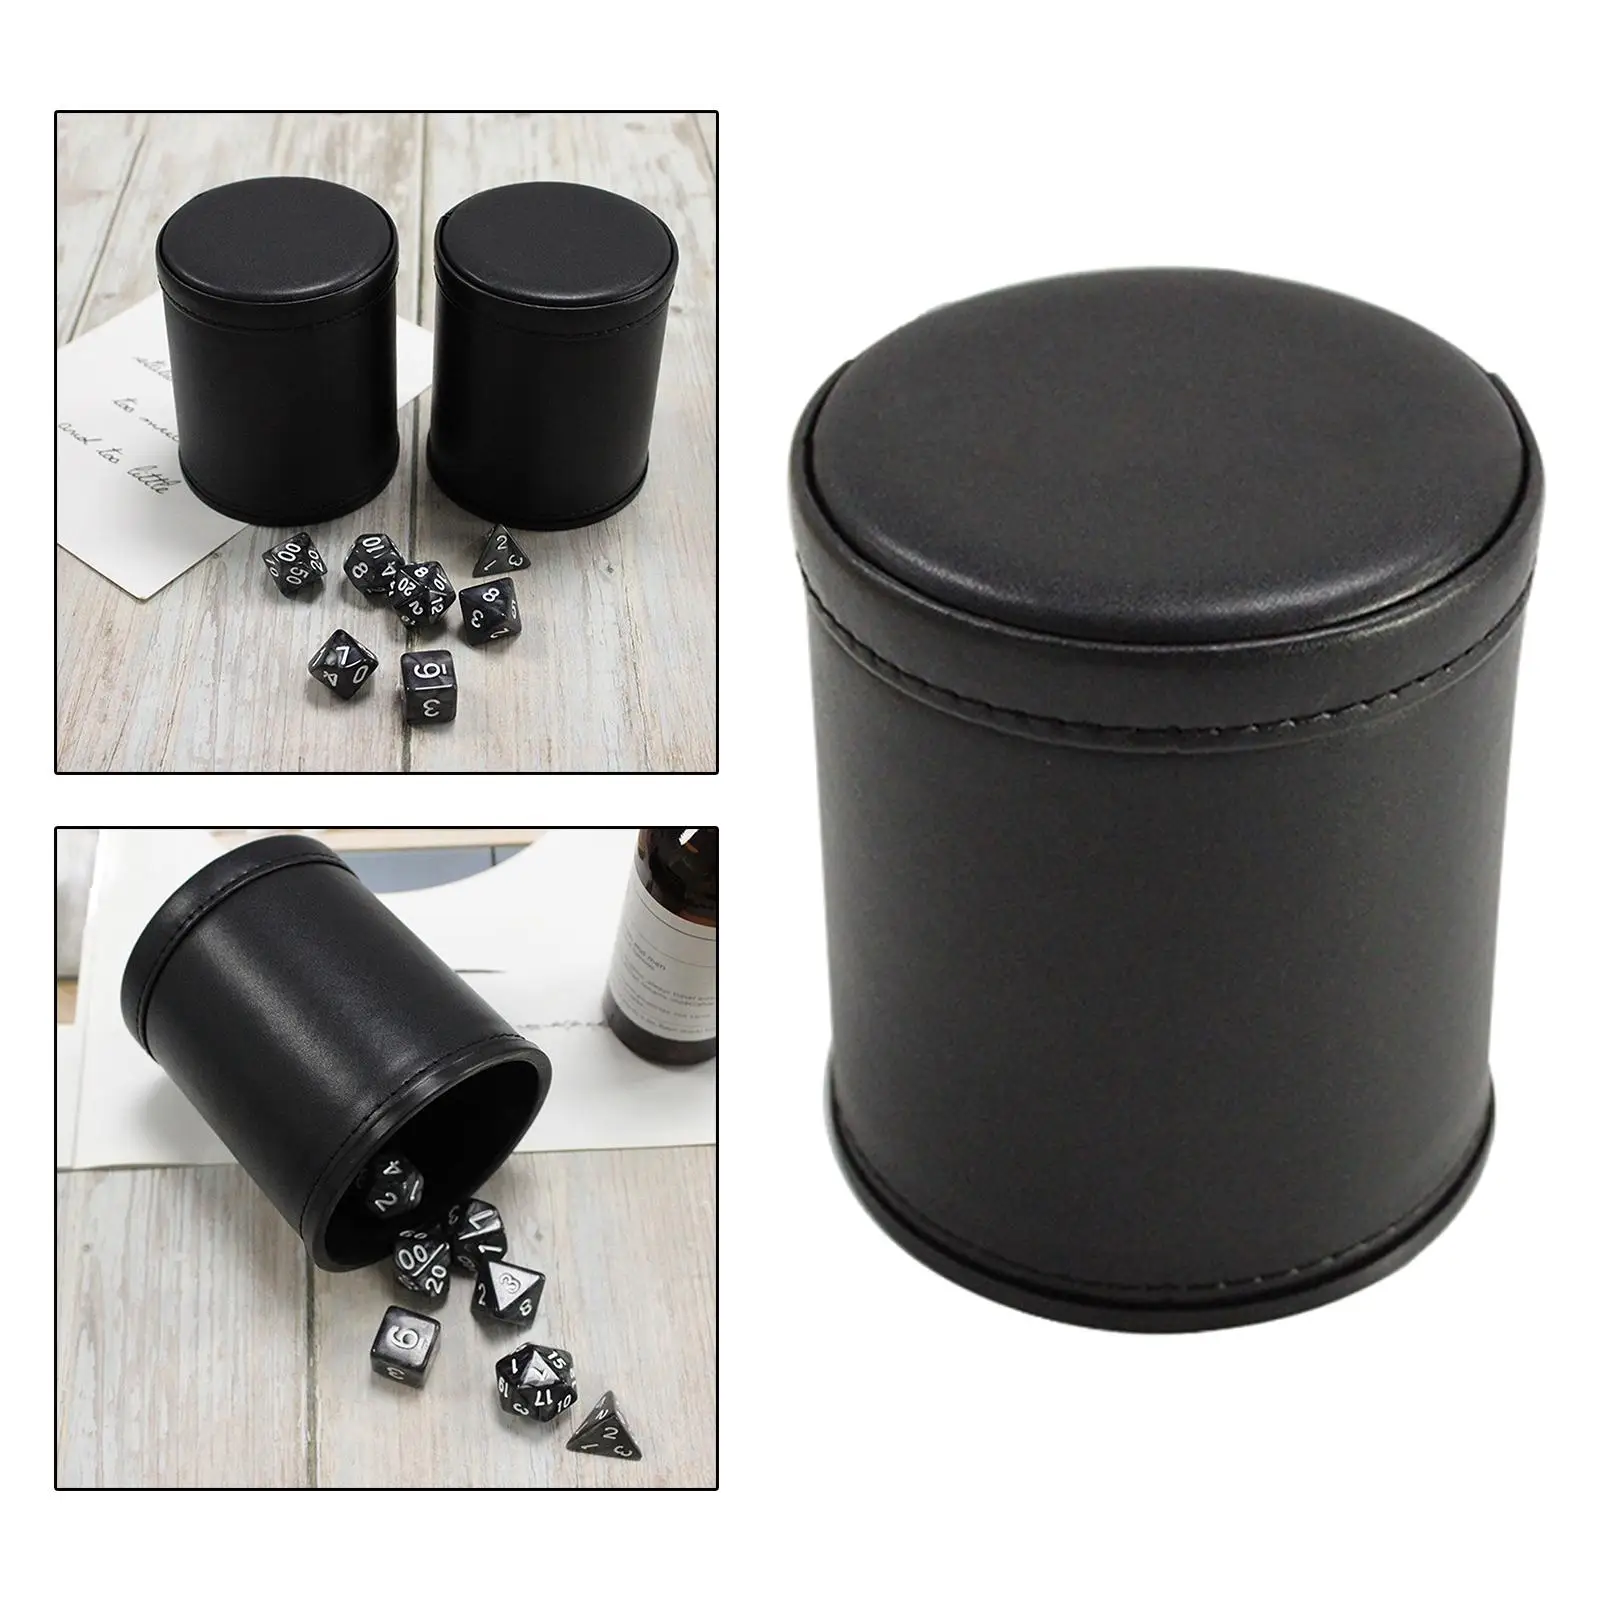 Manual Dice Cup Dice Game Accessories Entertainment Leather Dice Decider Dice Box Dice Shaker for Club Ktv Bar Party Home